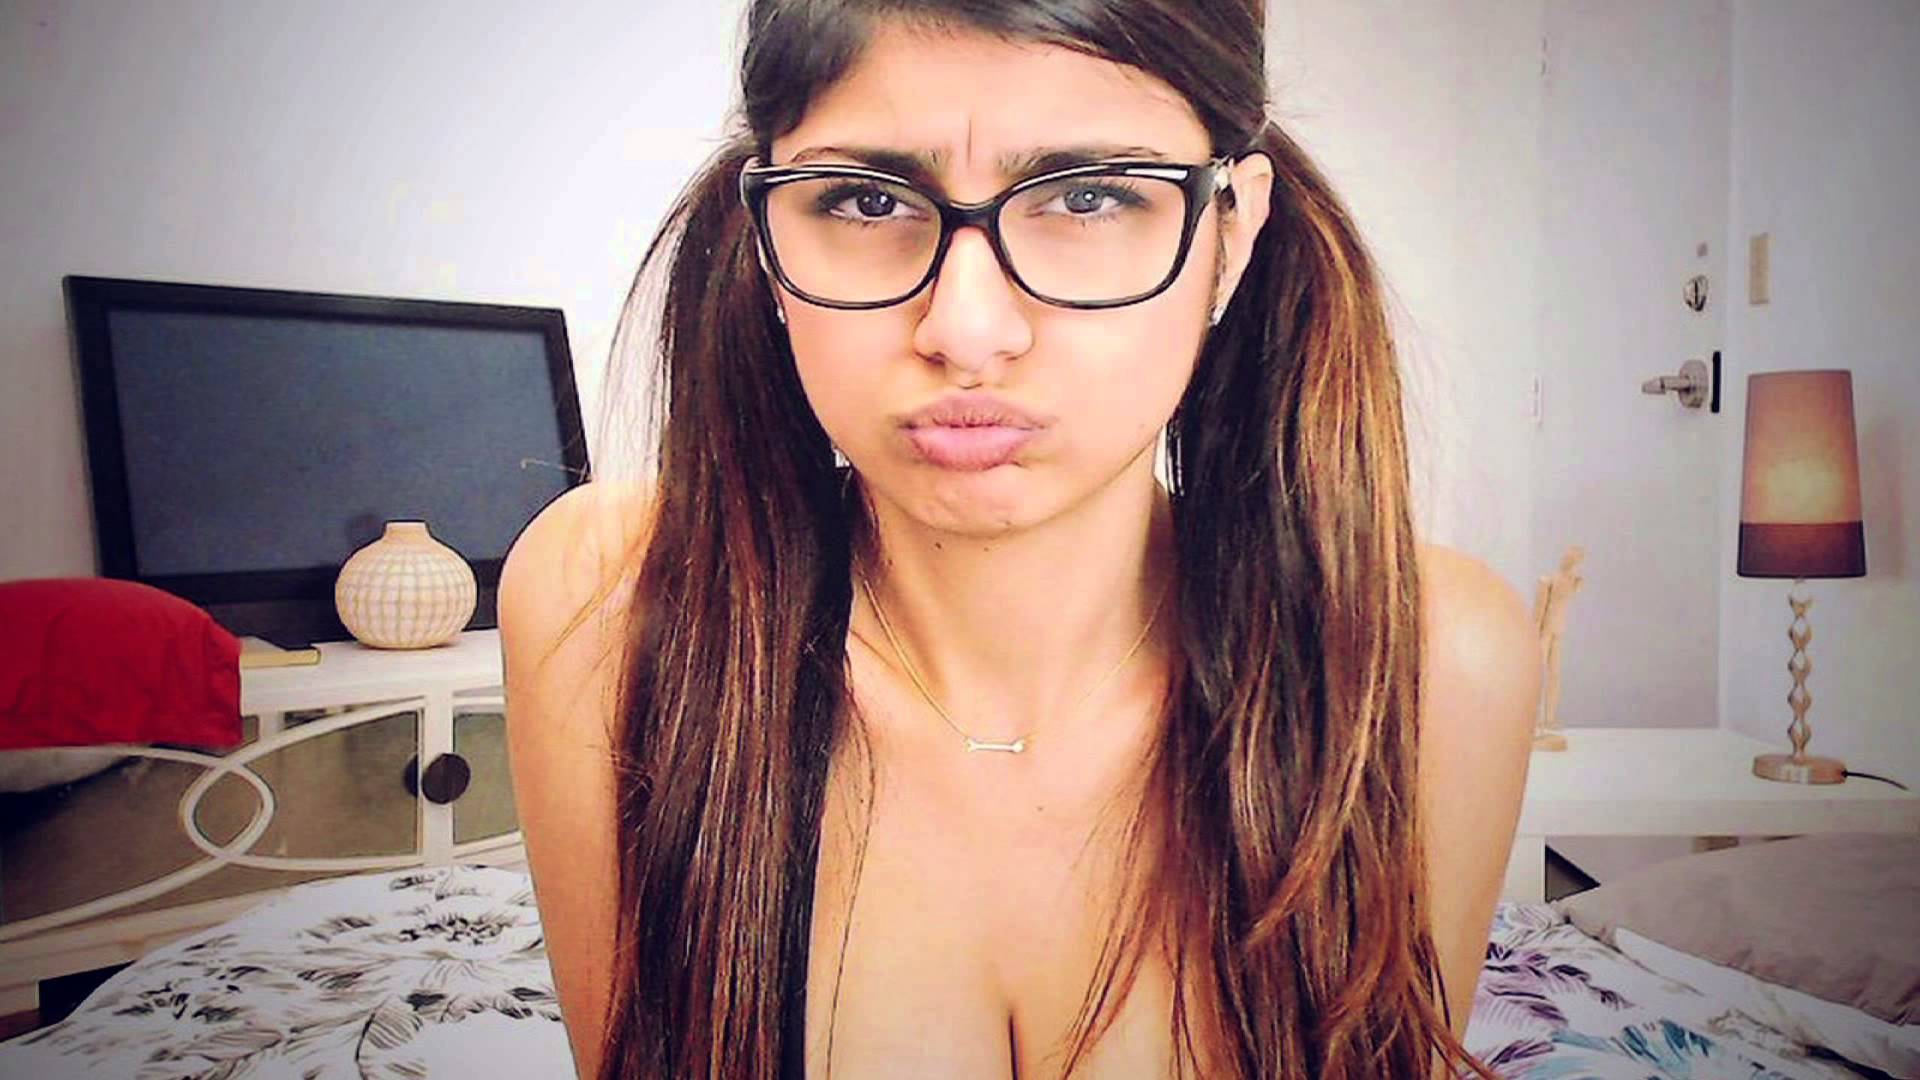 Mia Khalifa Latest Hd Desktop Pictures, Images And Wallpapers.